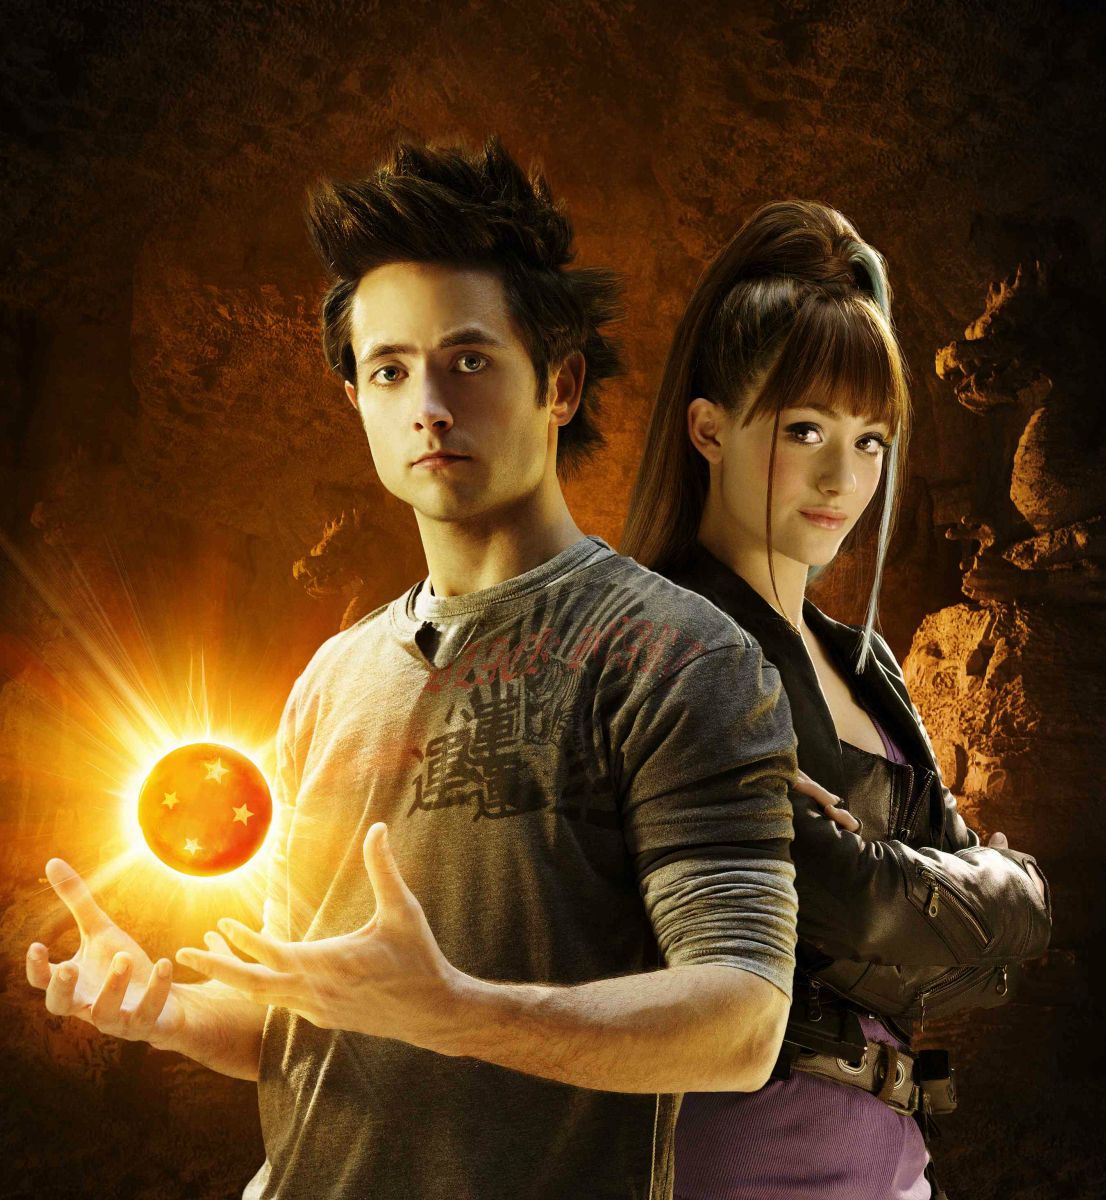 Cute, but definitely NOT Asian -High resolution pics of DRAGONBALL EVOLUTION came out